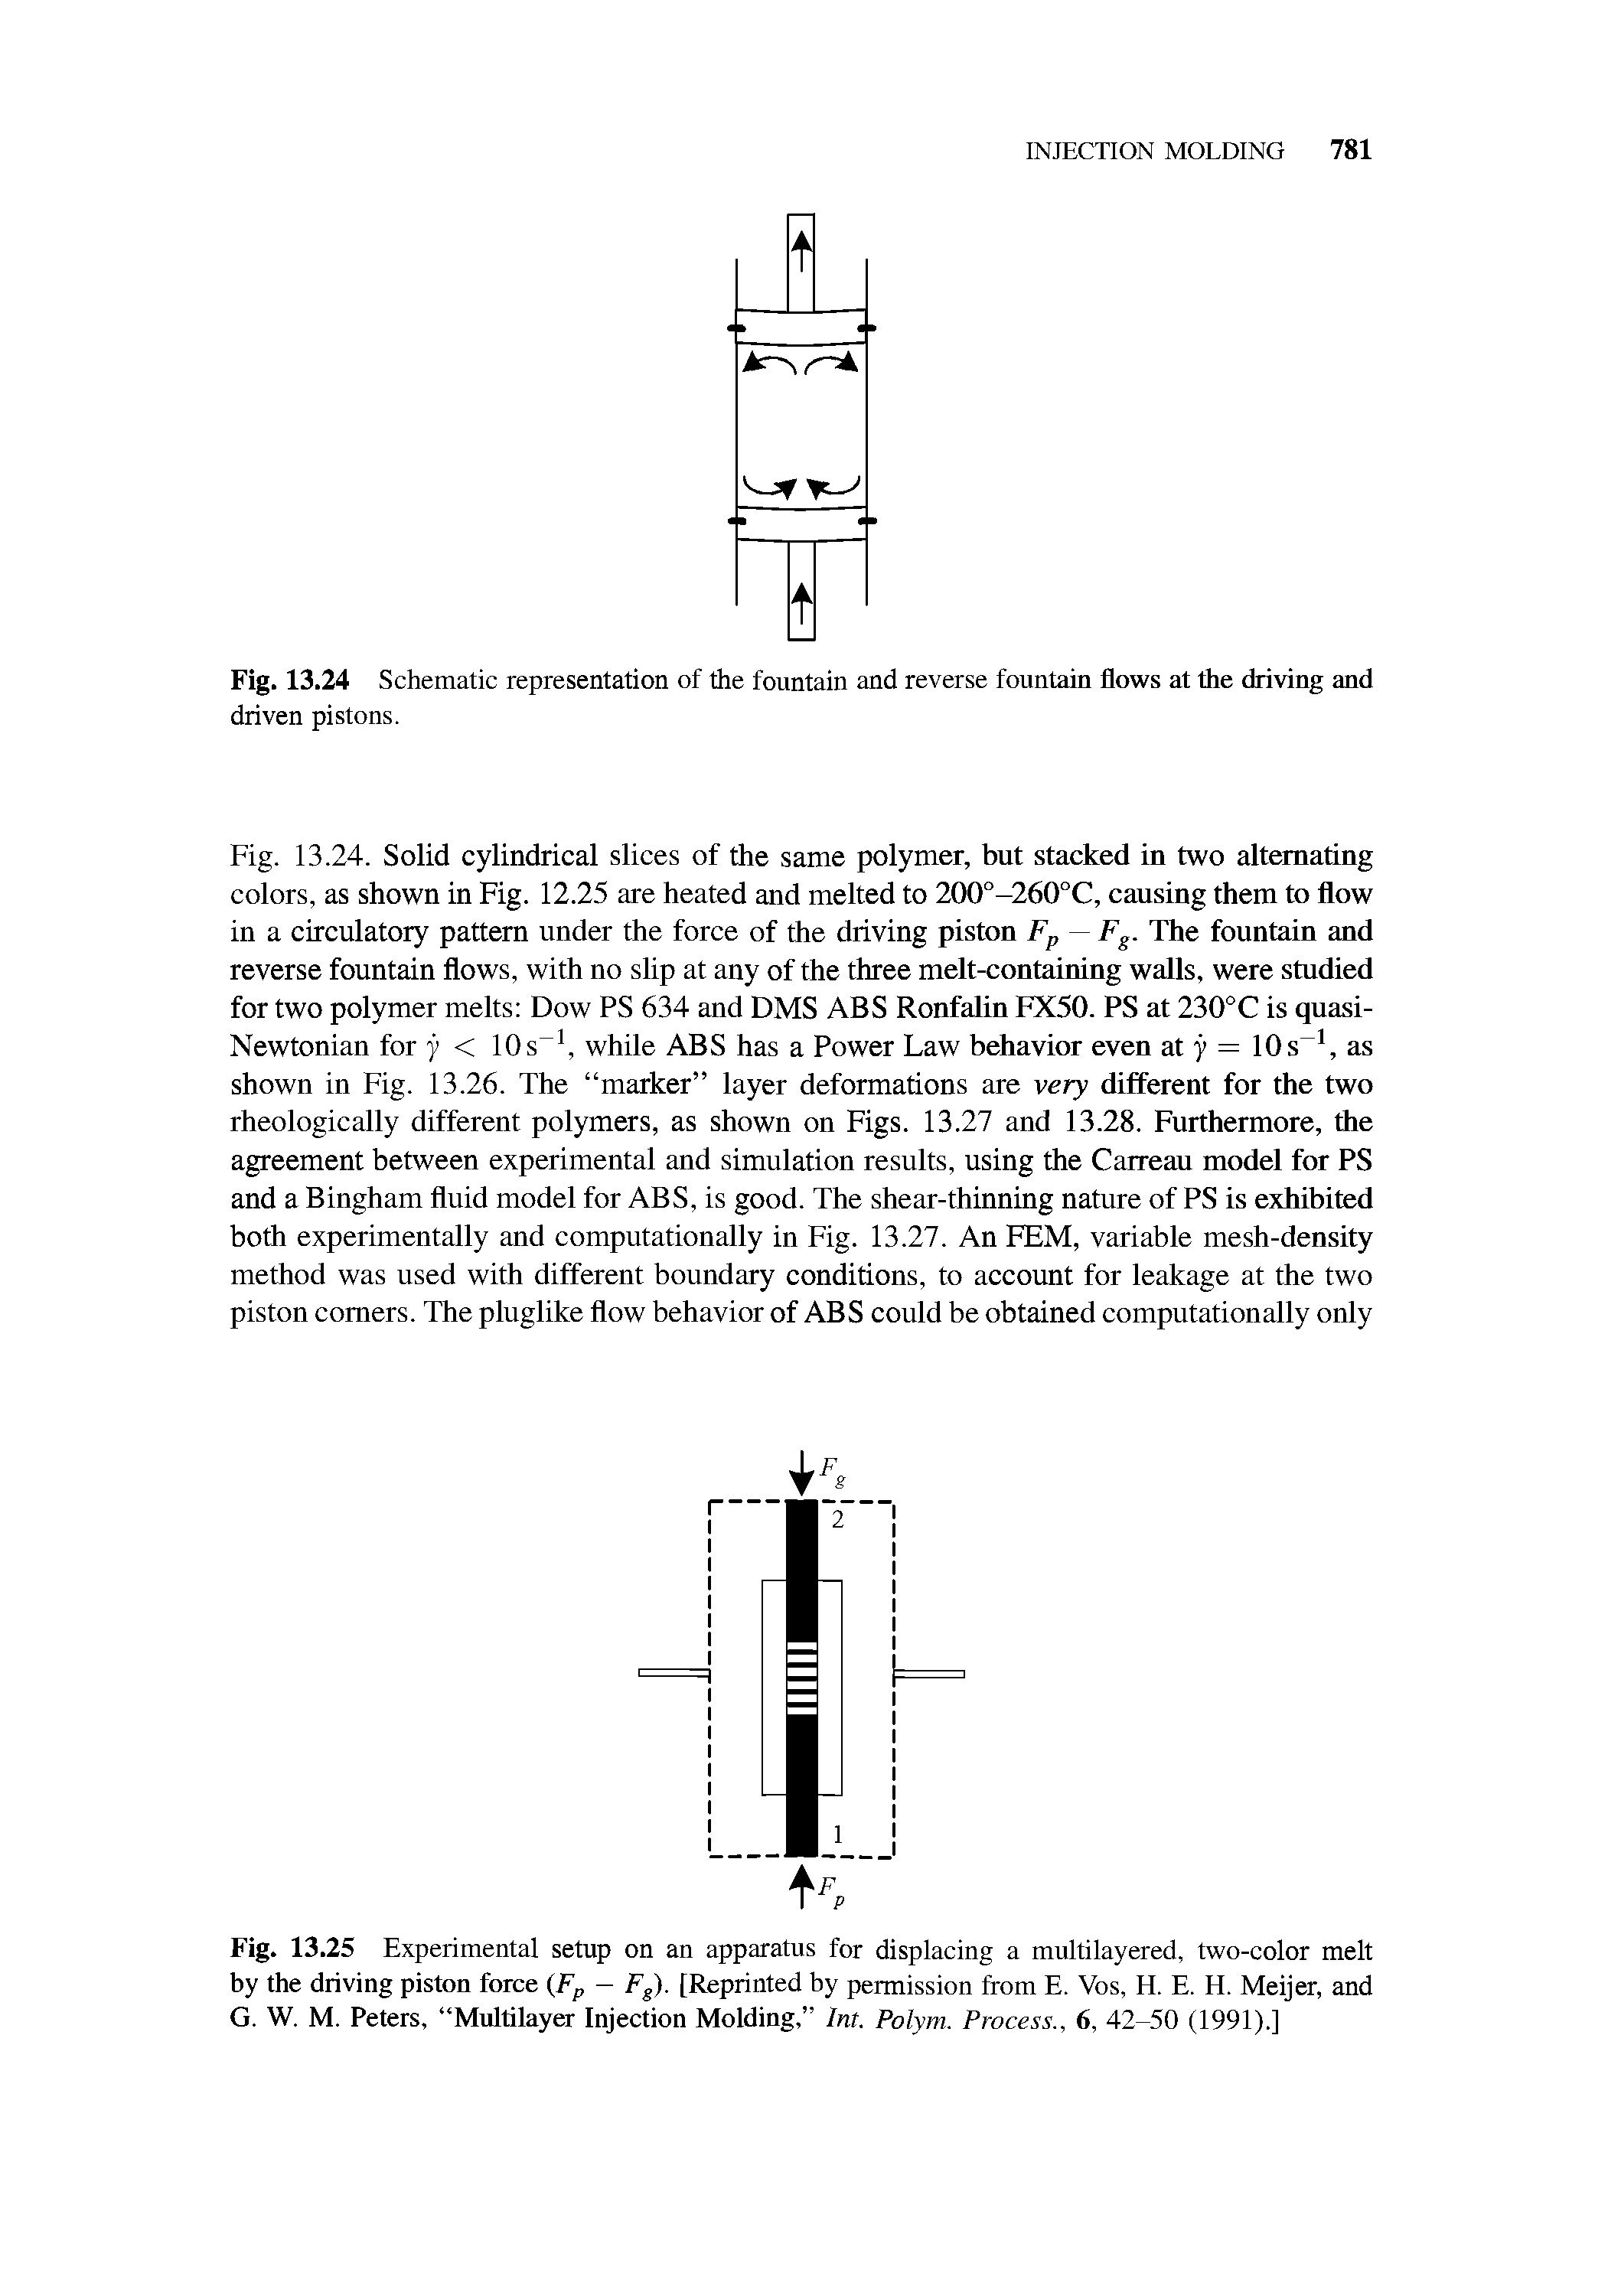 Fig. 13.25 Experimental setup on an apparatus for displacing a multilayered, two-color melt by the driving piston force (Fp - Fg). [Reprinted by permission from E. Vos, H. E. H. Meijer, and G. W. M. Peters, Multilayer Injection Molding, Int. Polym. Process., 6, 42-50 (1991).]...